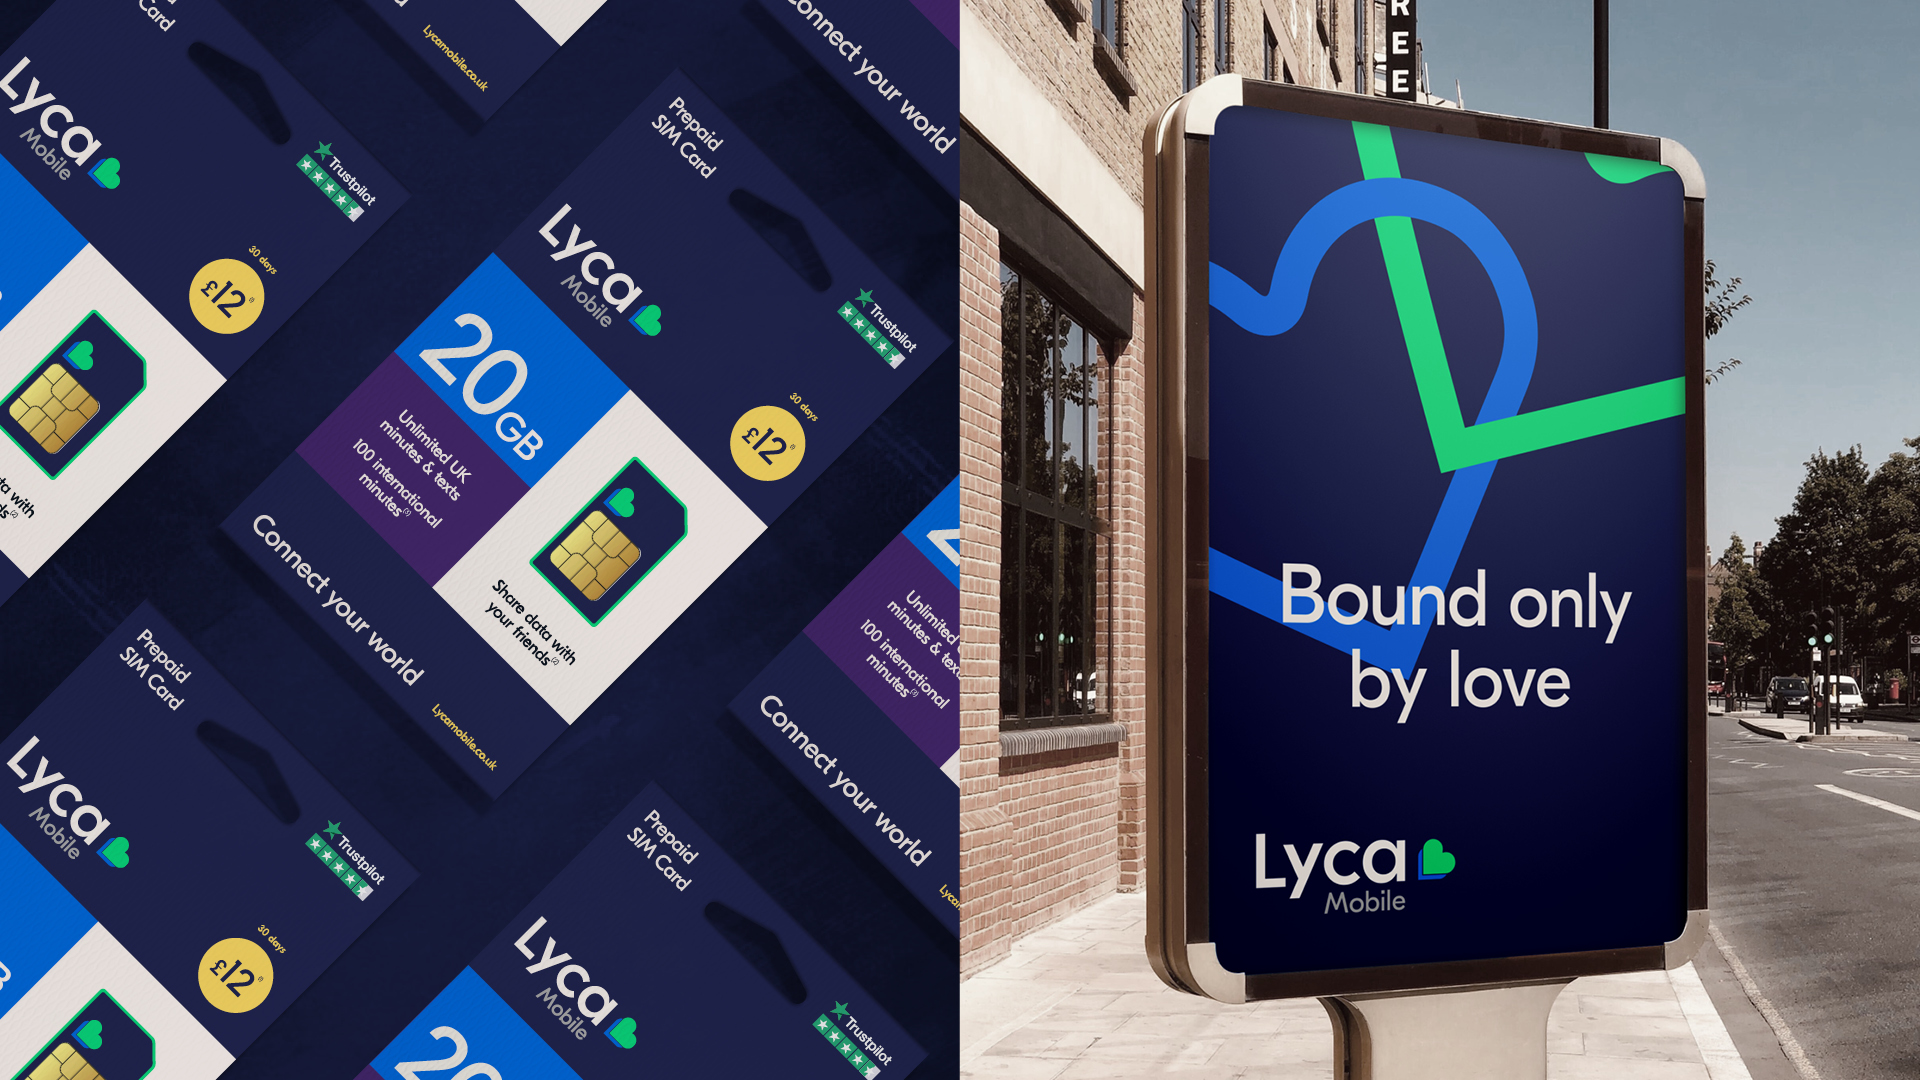 Clear M&C Saatchi Reinvents Lyca Mobile Brand